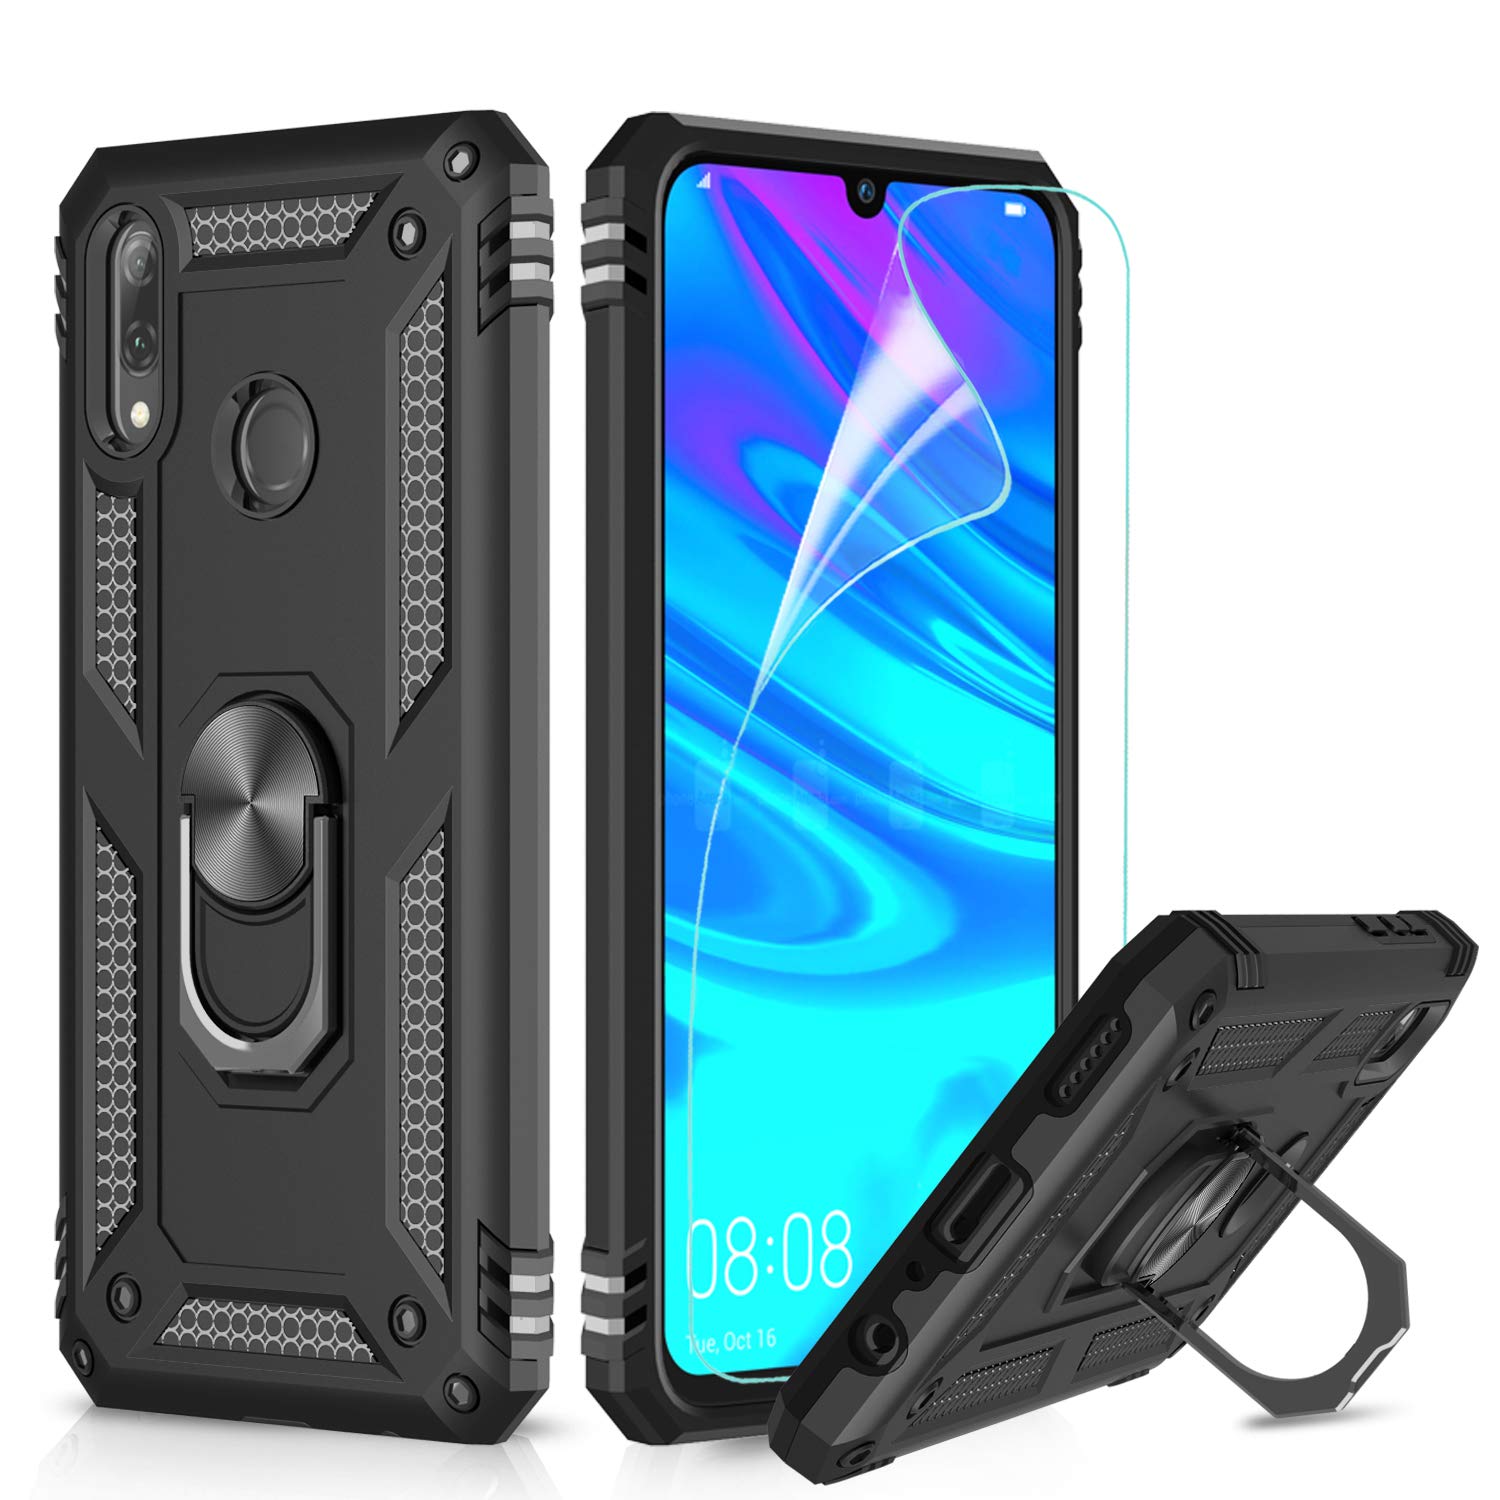 Huawei P Smart 2019 Silicone Case